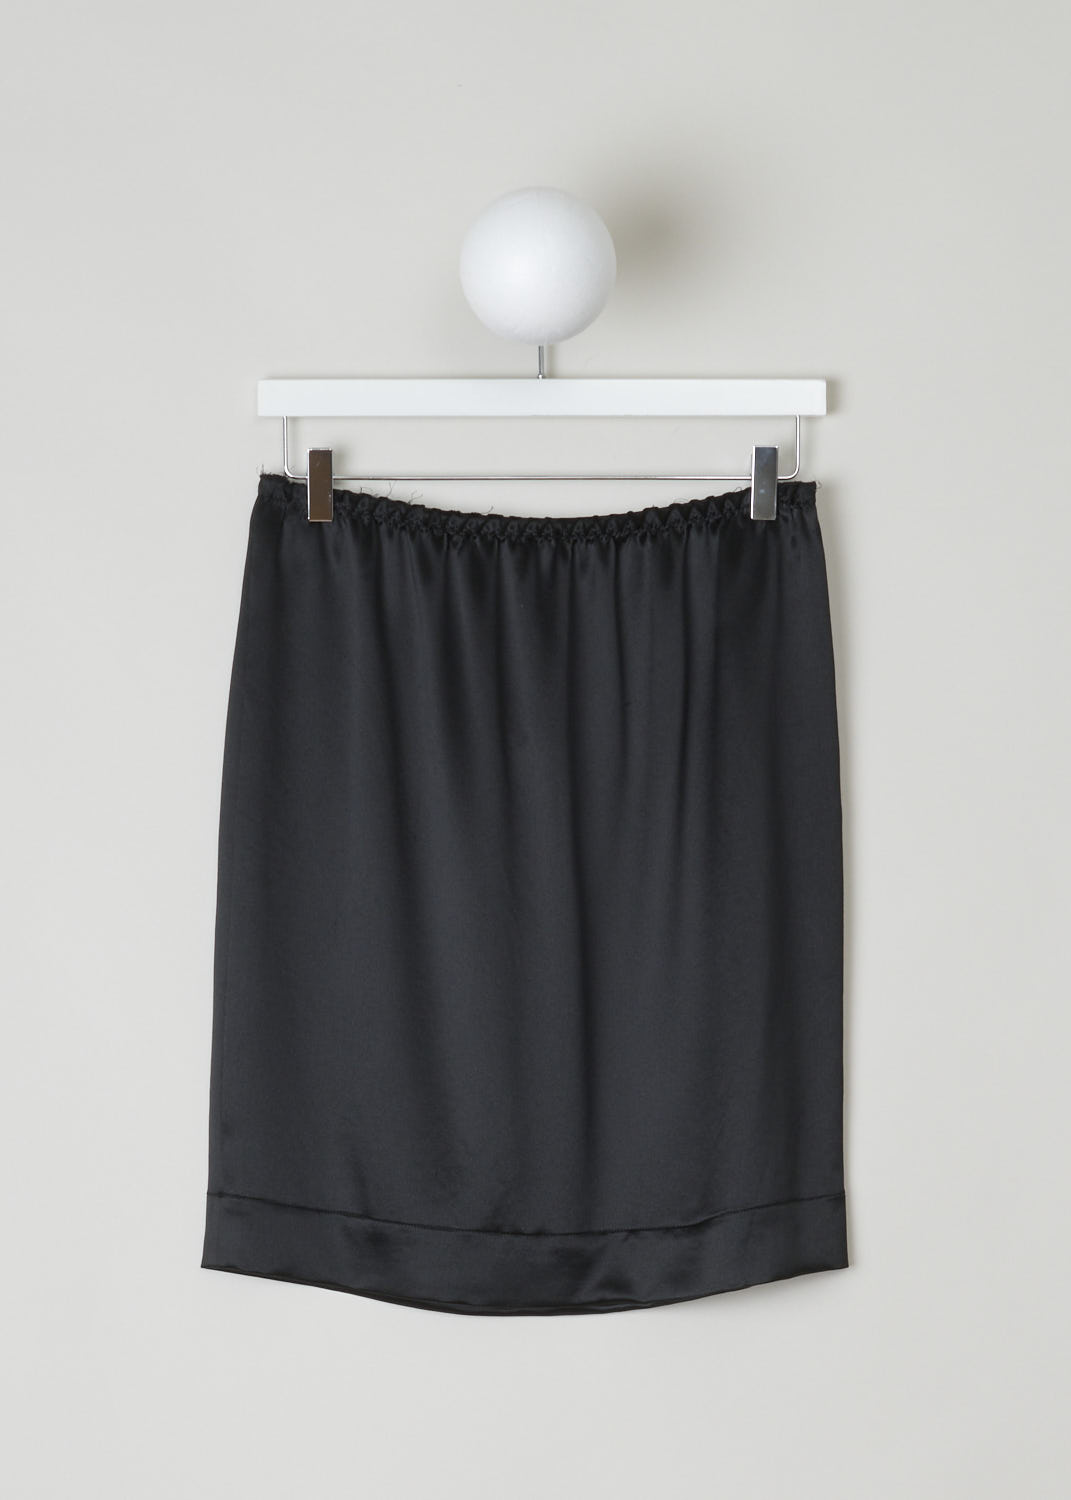 LANVIN, BLACK SILK MINI SKIRT, W040110626P3A, Black, Front, This silky smooth black mini skirt features an elasticated waistband with gathered silk ruffles, a bronze-toned side zipper and a broad hemline. 
